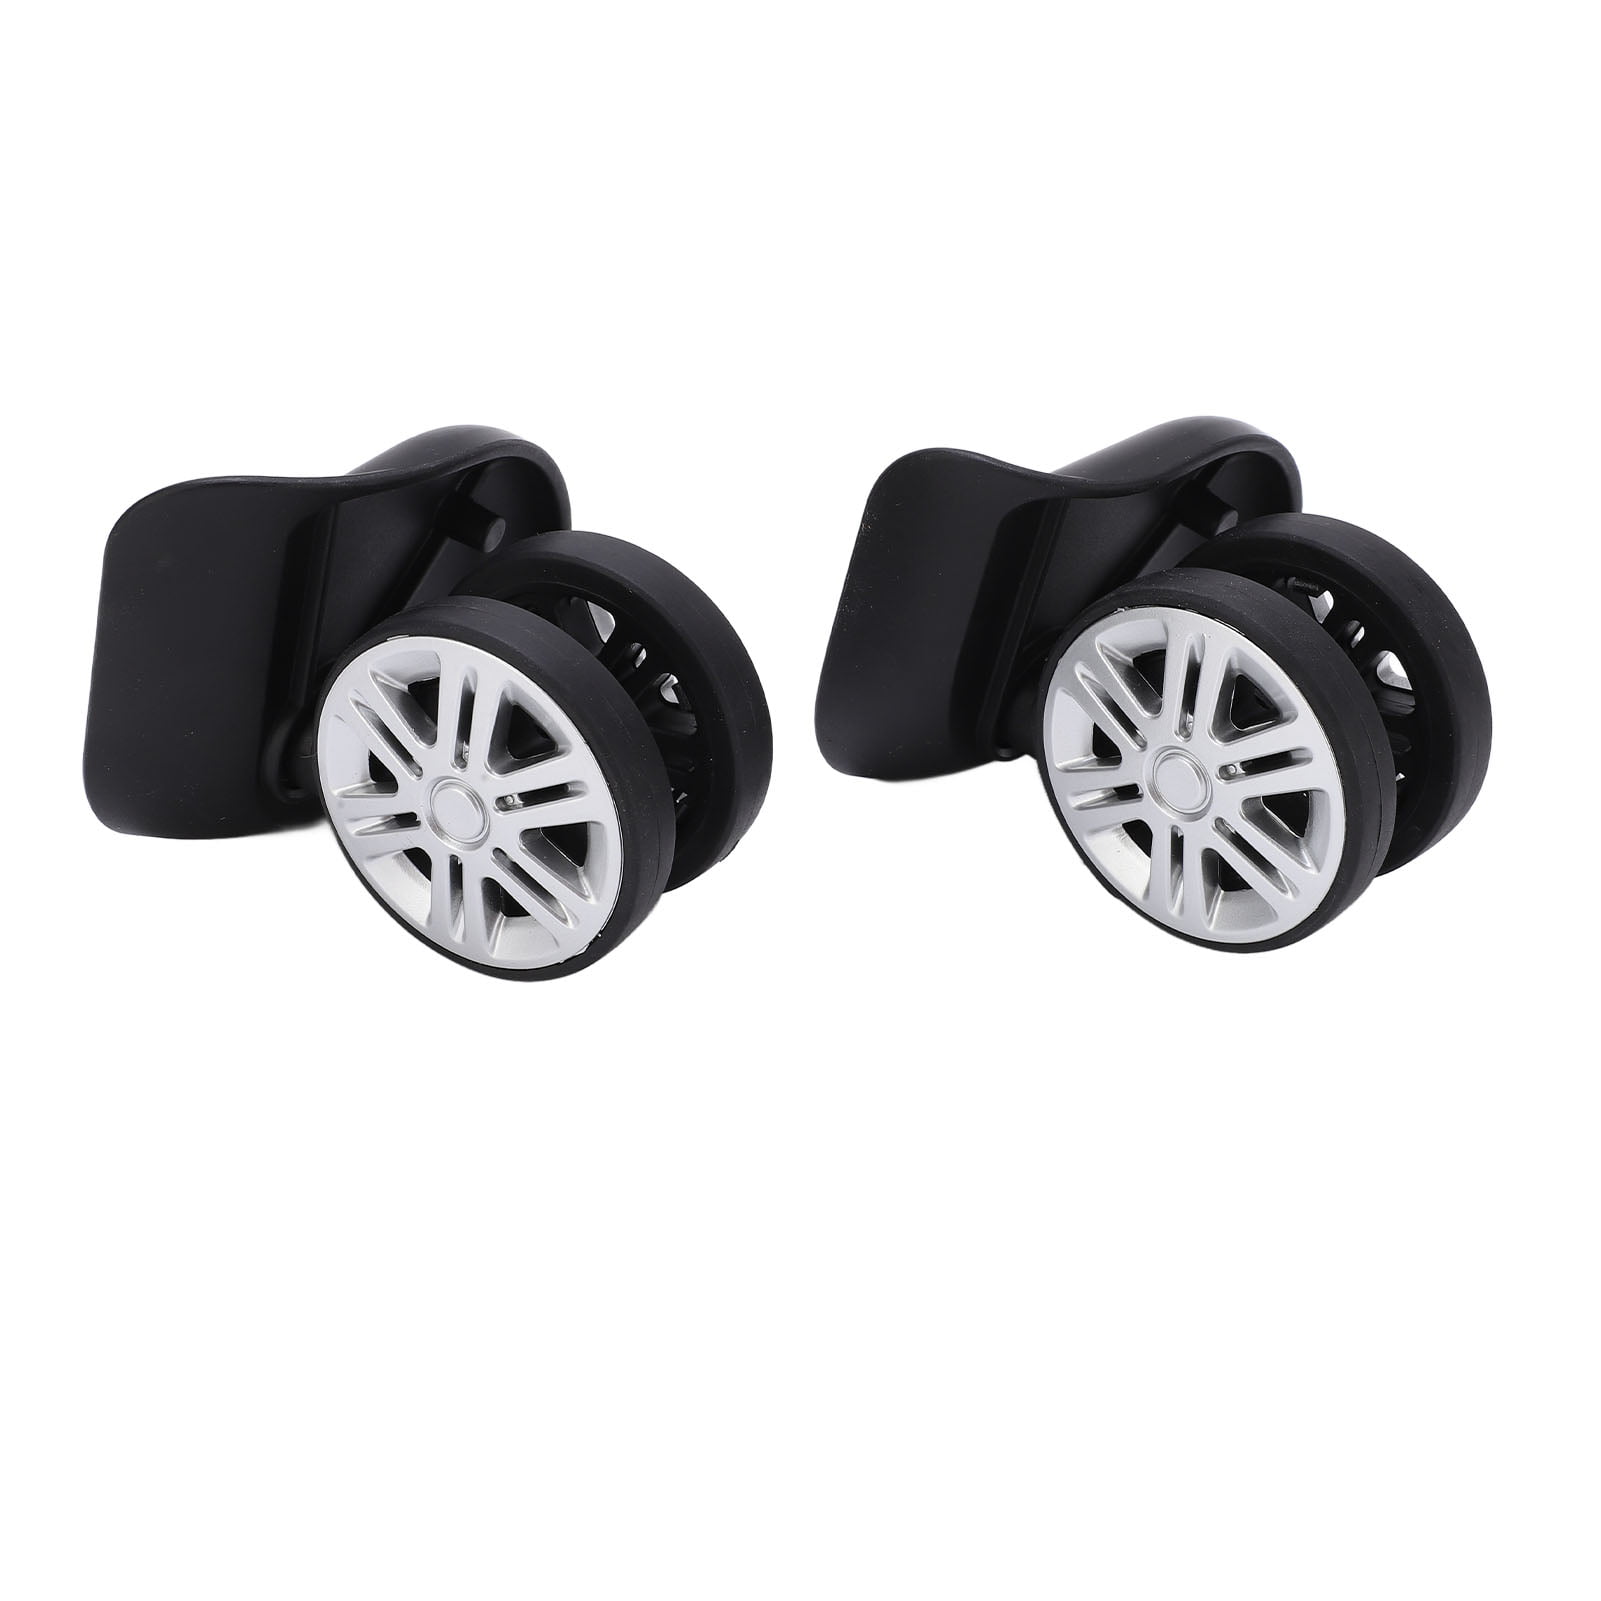 Luggage Suitcase Wheels,1 Pair A65 Luggage Replacement Wheels Mute Swivel Suitcase Luggage Caster Wheels Repair Parts for Luggage Kits 